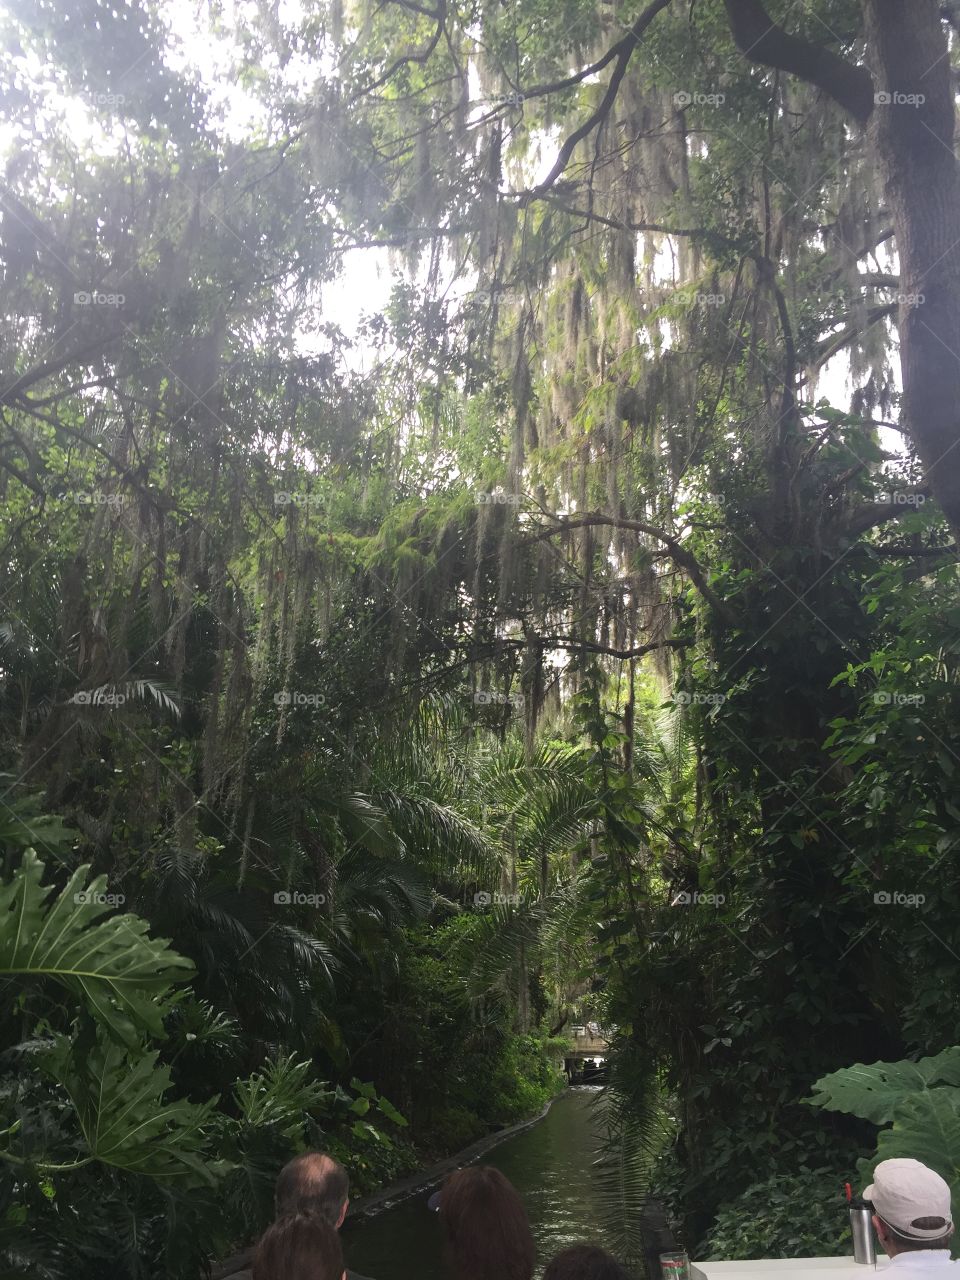 The amazing jungle that is Fern Canal in Winter Park, FL